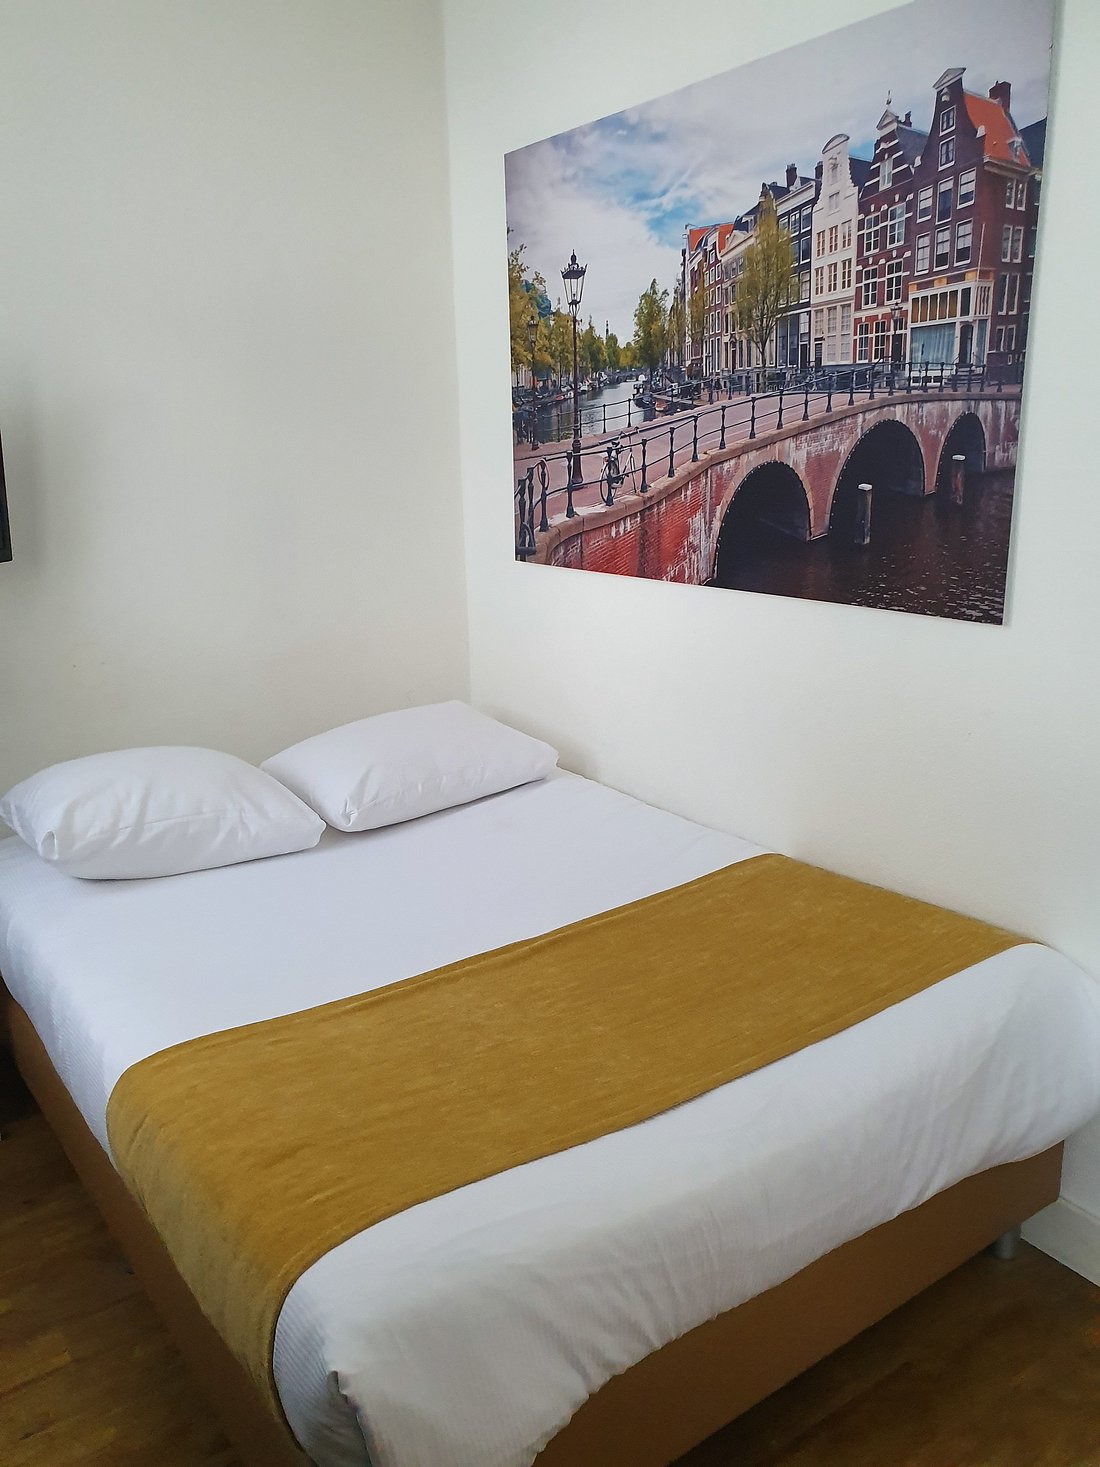 Hotel Residence Le Coin from $ Amsterdam Hotel Deals & Reviews - KAYAK